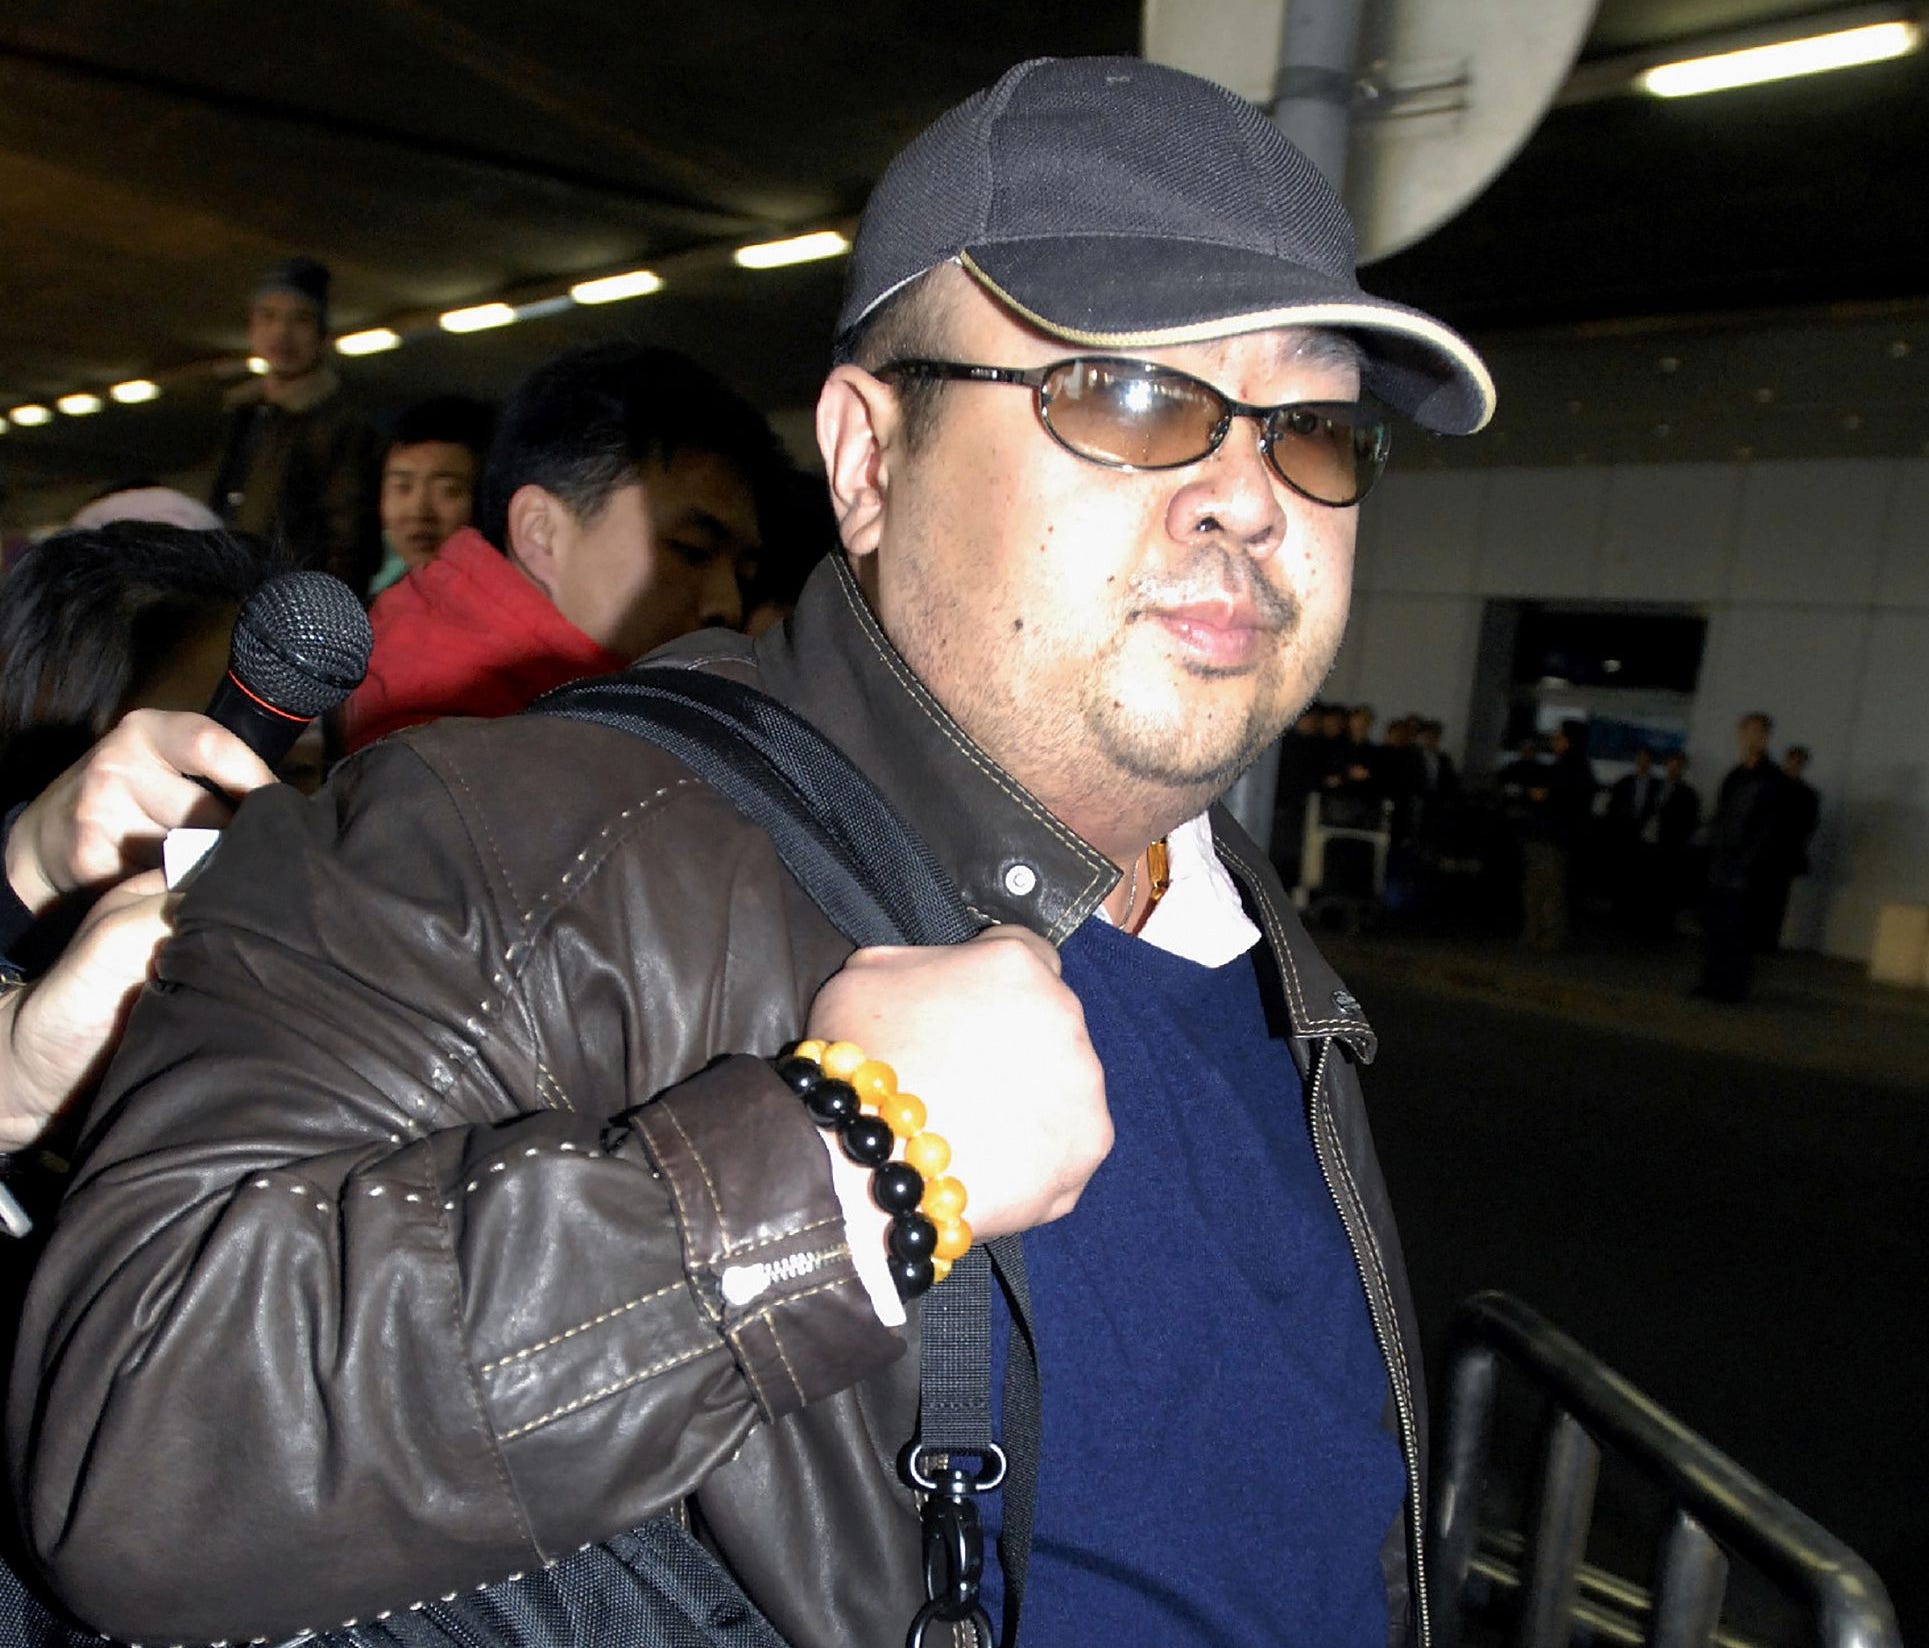 This file photo taken on February 11, 2007 shows a man believed to be then-North Korean leader Kim Jong Il's eldest son, Kim Jong Nam, walking amongs journalists upon his arrival at Beijing's international airport.